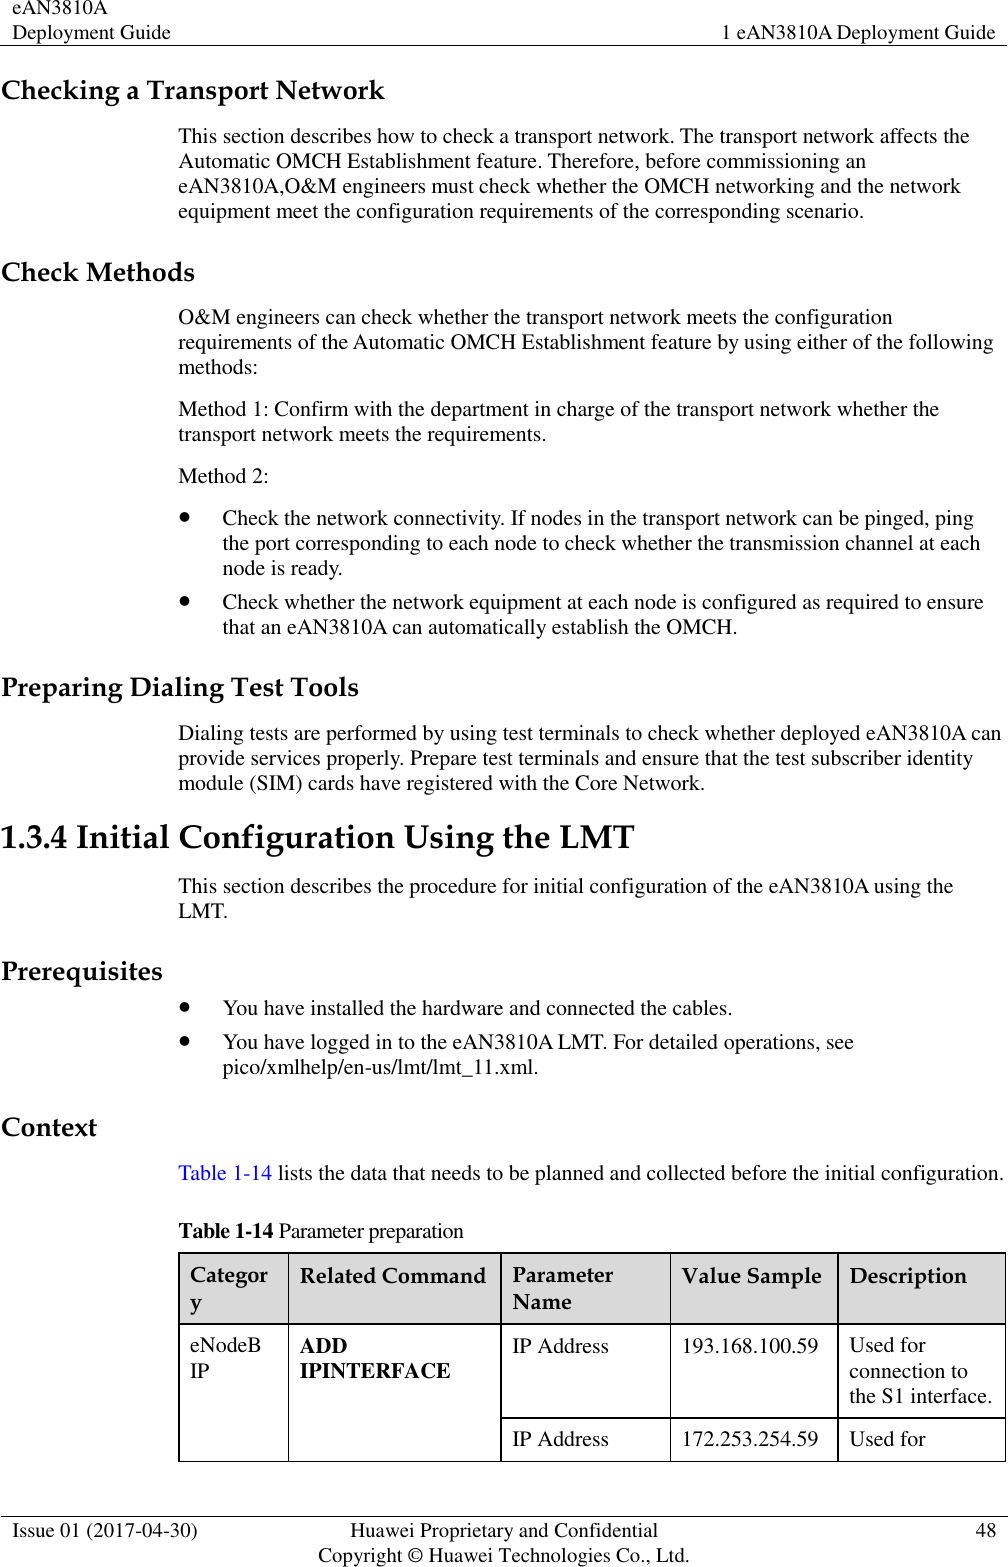 eAN3810A Deployment Guide 1 eAN3810A Deployment Guide  Issue 01 (2017-04-30) Huawei Proprietary and Confidential                                     Copyright © Huawei Technologies Co., Ltd. 48  Checking a Transport Network This section describes how to check a transport network. The transport network affects the Automatic OMCH Establishment feature. Therefore, before commissioning an eAN3810A,O&amp;M engineers must check whether the OMCH networking and the network equipment meet the configuration requirements of the corresponding scenario.     Check Methods O&amp;M engineers can check whether the transport network meets the configuration requirements of the Automatic OMCH Establishment feature by using either of the following methods:   Method 1: Confirm with the department in charge of the transport network whether the transport network meets the requirements.   Method 2:    Check the network connectivity. If nodes in the transport network can be pinged, ping the port corresponding to each node to check whether the transmission channel at each node is ready.  Check whether the network equipment at each node is configured as required to ensure that an eAN3810A can automatically establish the OMCH. Preparing Dialing Test Tools Dialing tests are performed by using test terminals to check whether deployed eAN3810A can provide services properly. Prepare test terminals and ensure that the test subscriber identity module (SIM) cards have registered with the Core Network. 1.3.4 Initial Configuration Using the LMT This section describes the procedure for initial configuration of the eAN3810A using the LMT. Prerequisites  You have installed the hardware and connected the cables.  You have logged in to the eAN3810A LMT. For detailed operations, see pico/xmlhelp/en-us/lmt/lmt_11.xml. Context Table 1-14 lists the data that needs to be planned and collected before the initial configuration. Table 1-14 Parameter preparation Category Related Command Parameter Name Value Sample Description eNodeB IP ADD IPINTERFACE IP Address 193.168.100.59 Used for connection to the S1 interface. IP Address 172.253.254.59 Used for 